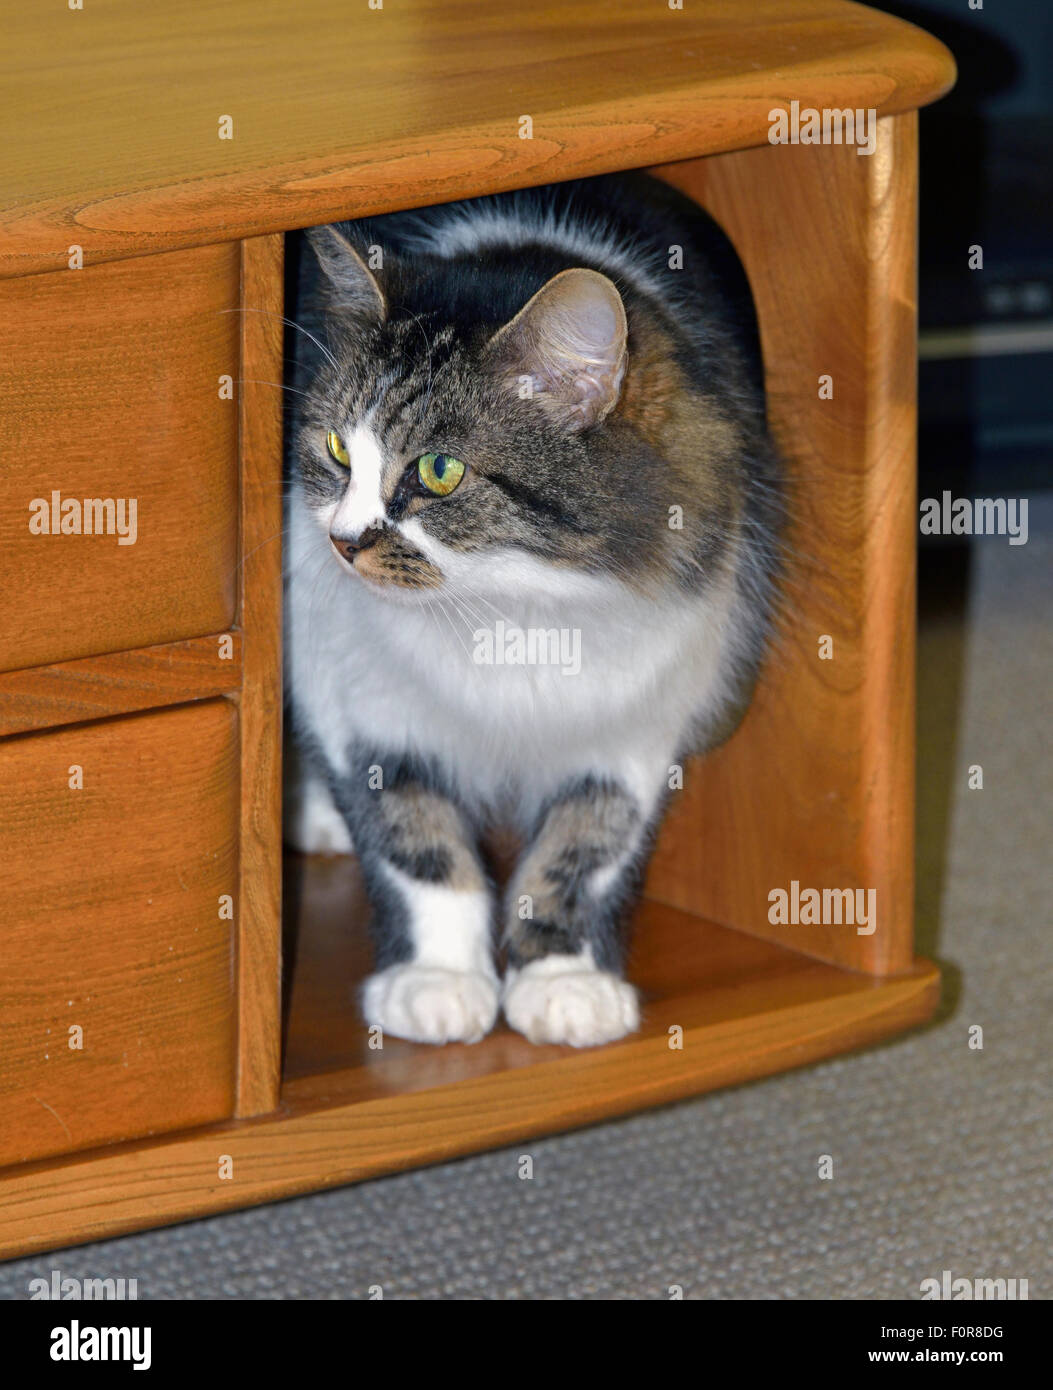 Cat peeping from wooden furniture. Stock Photo